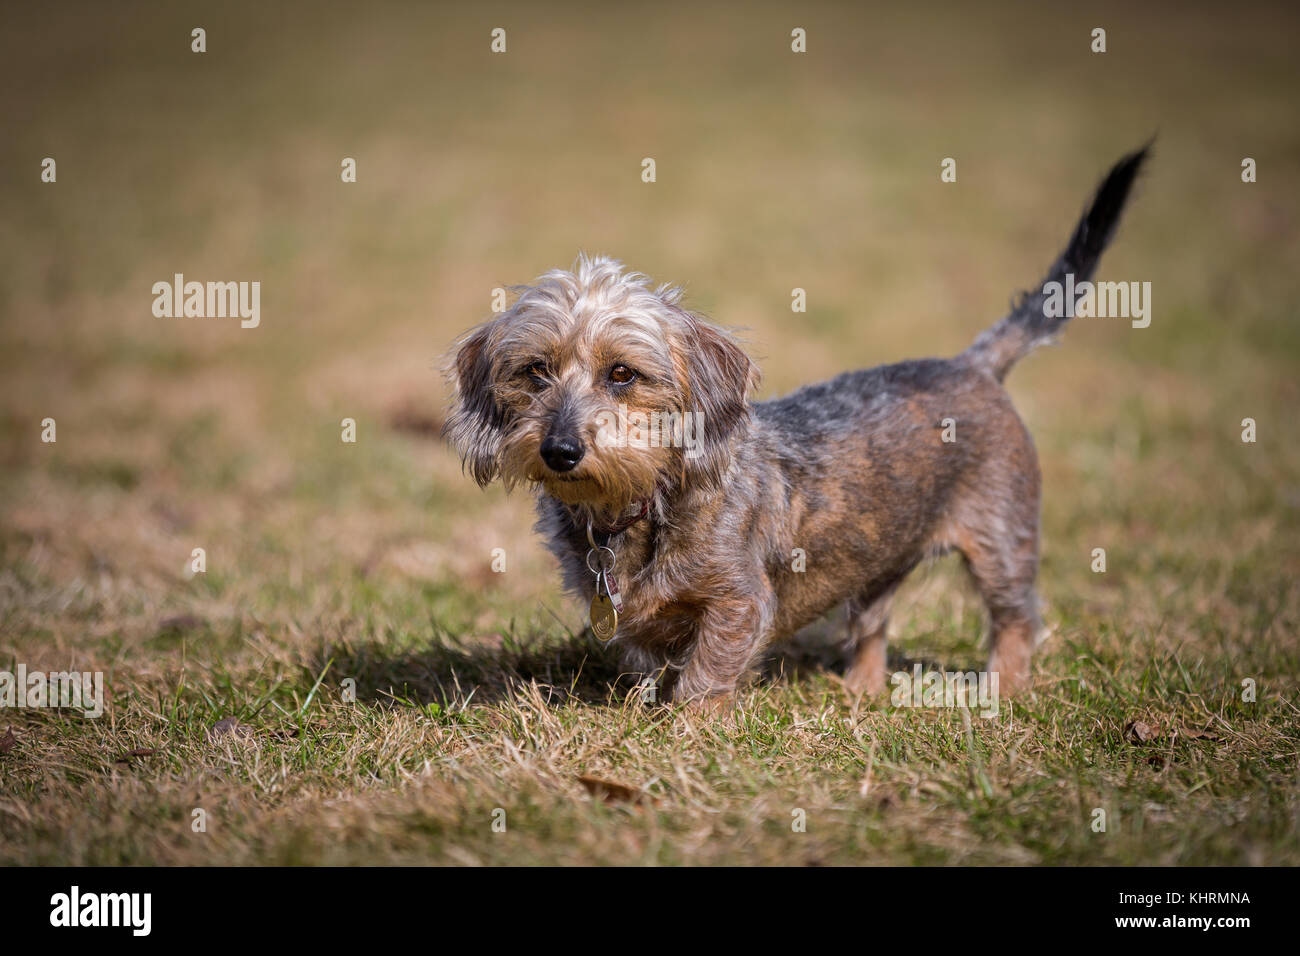 Small wire-haired miniature dachshund standing in a meadow and looking slightly past the photographer. Stock Photo